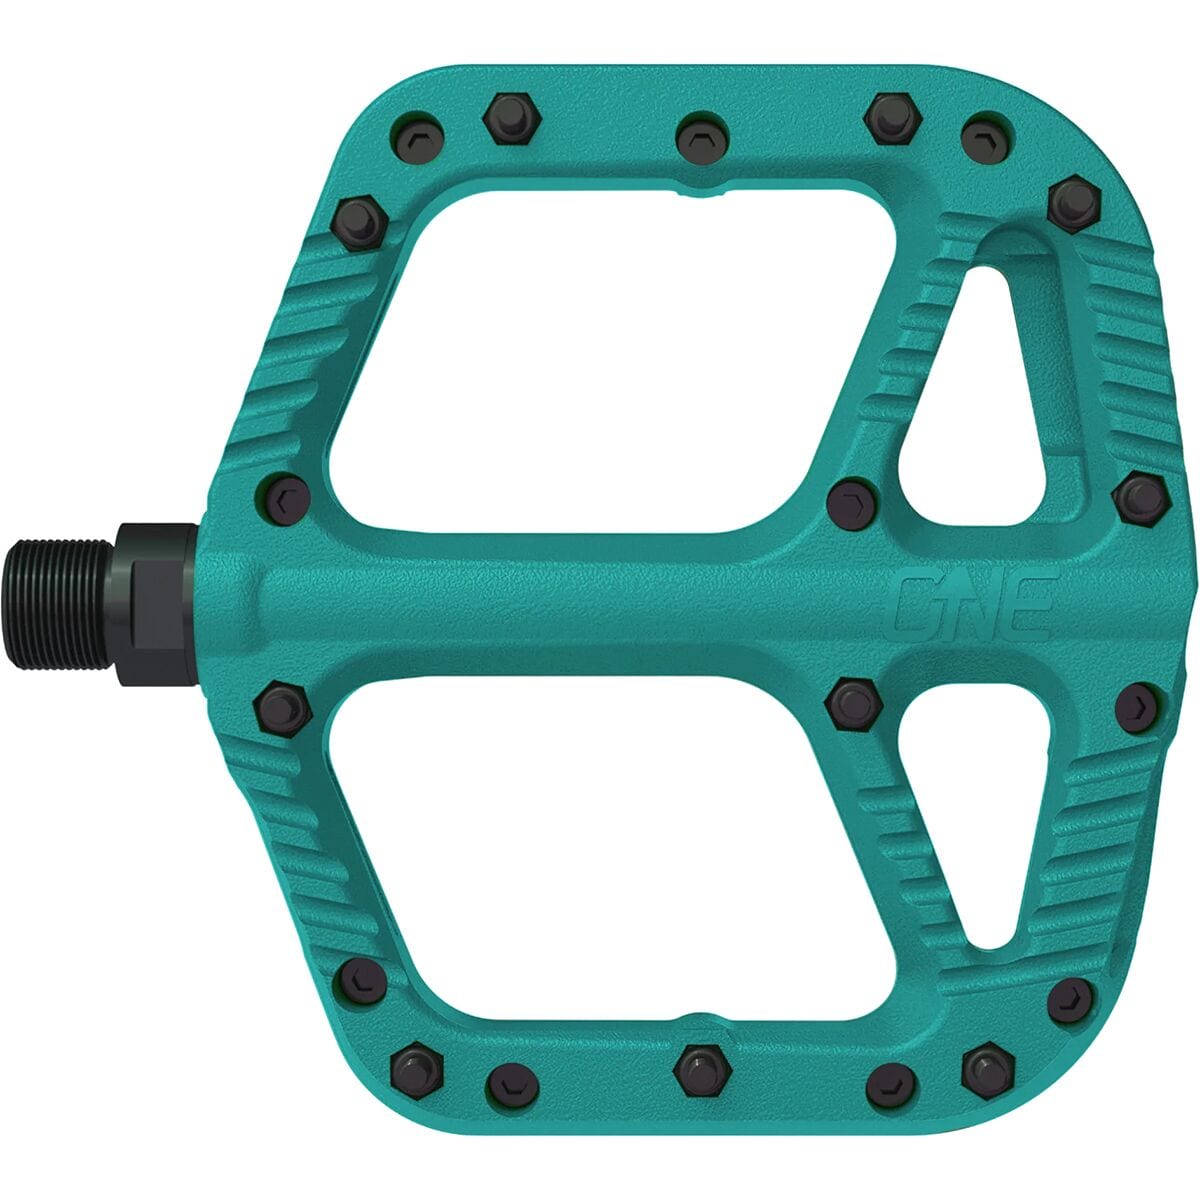 OneUp Components Composite Pedal Turquoise, One Size